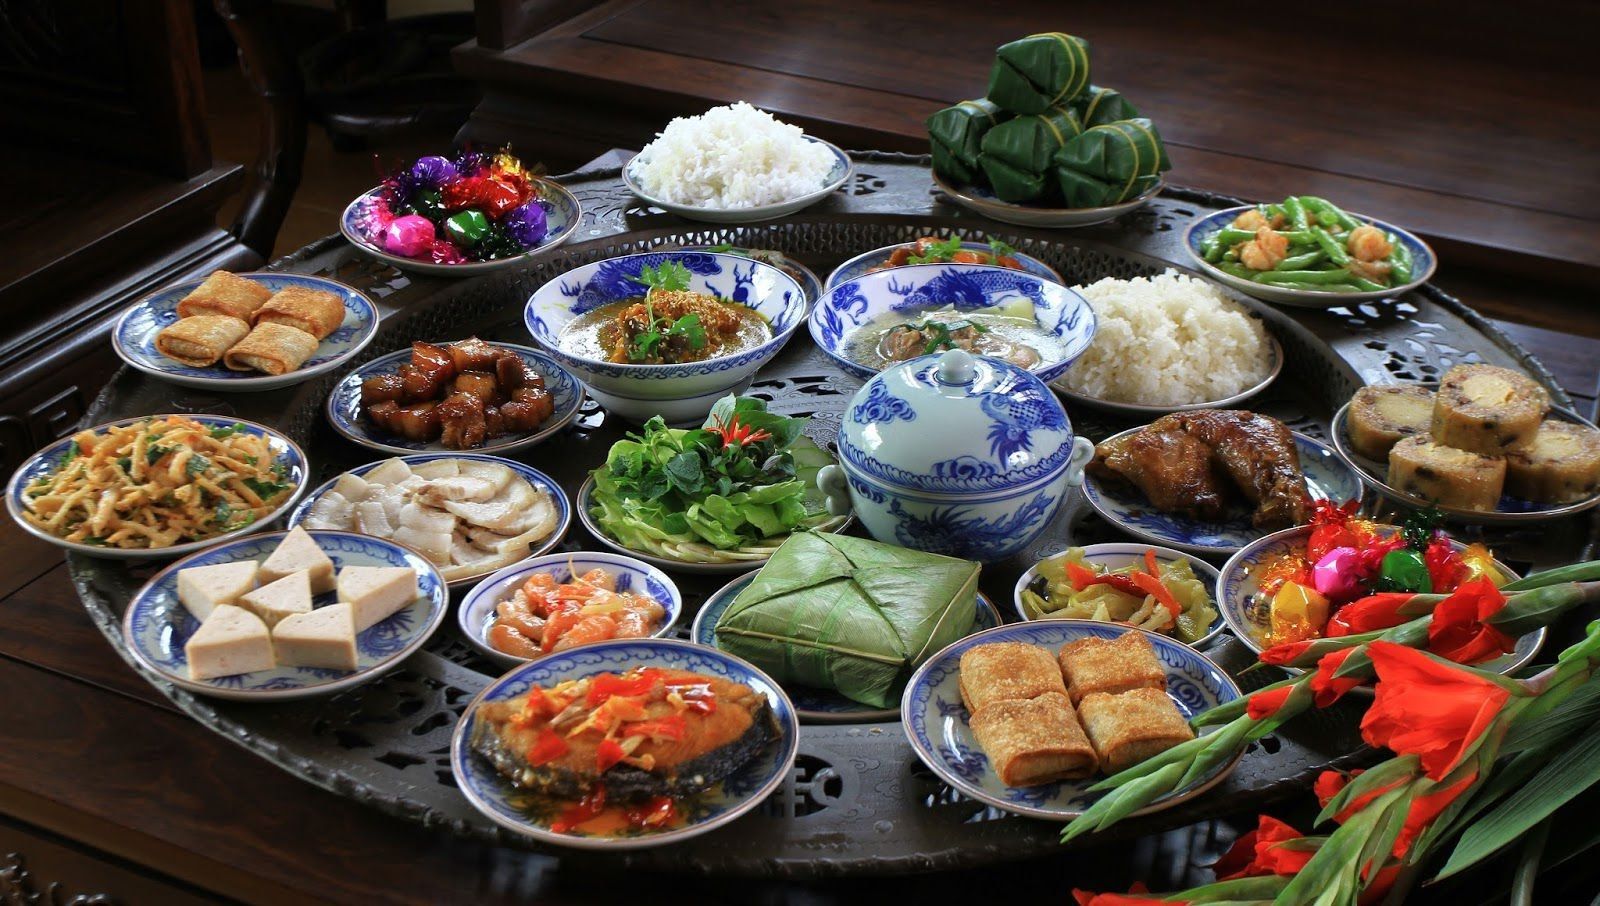 Irreplaceable dishes in a typical Vietnamese Tet meal